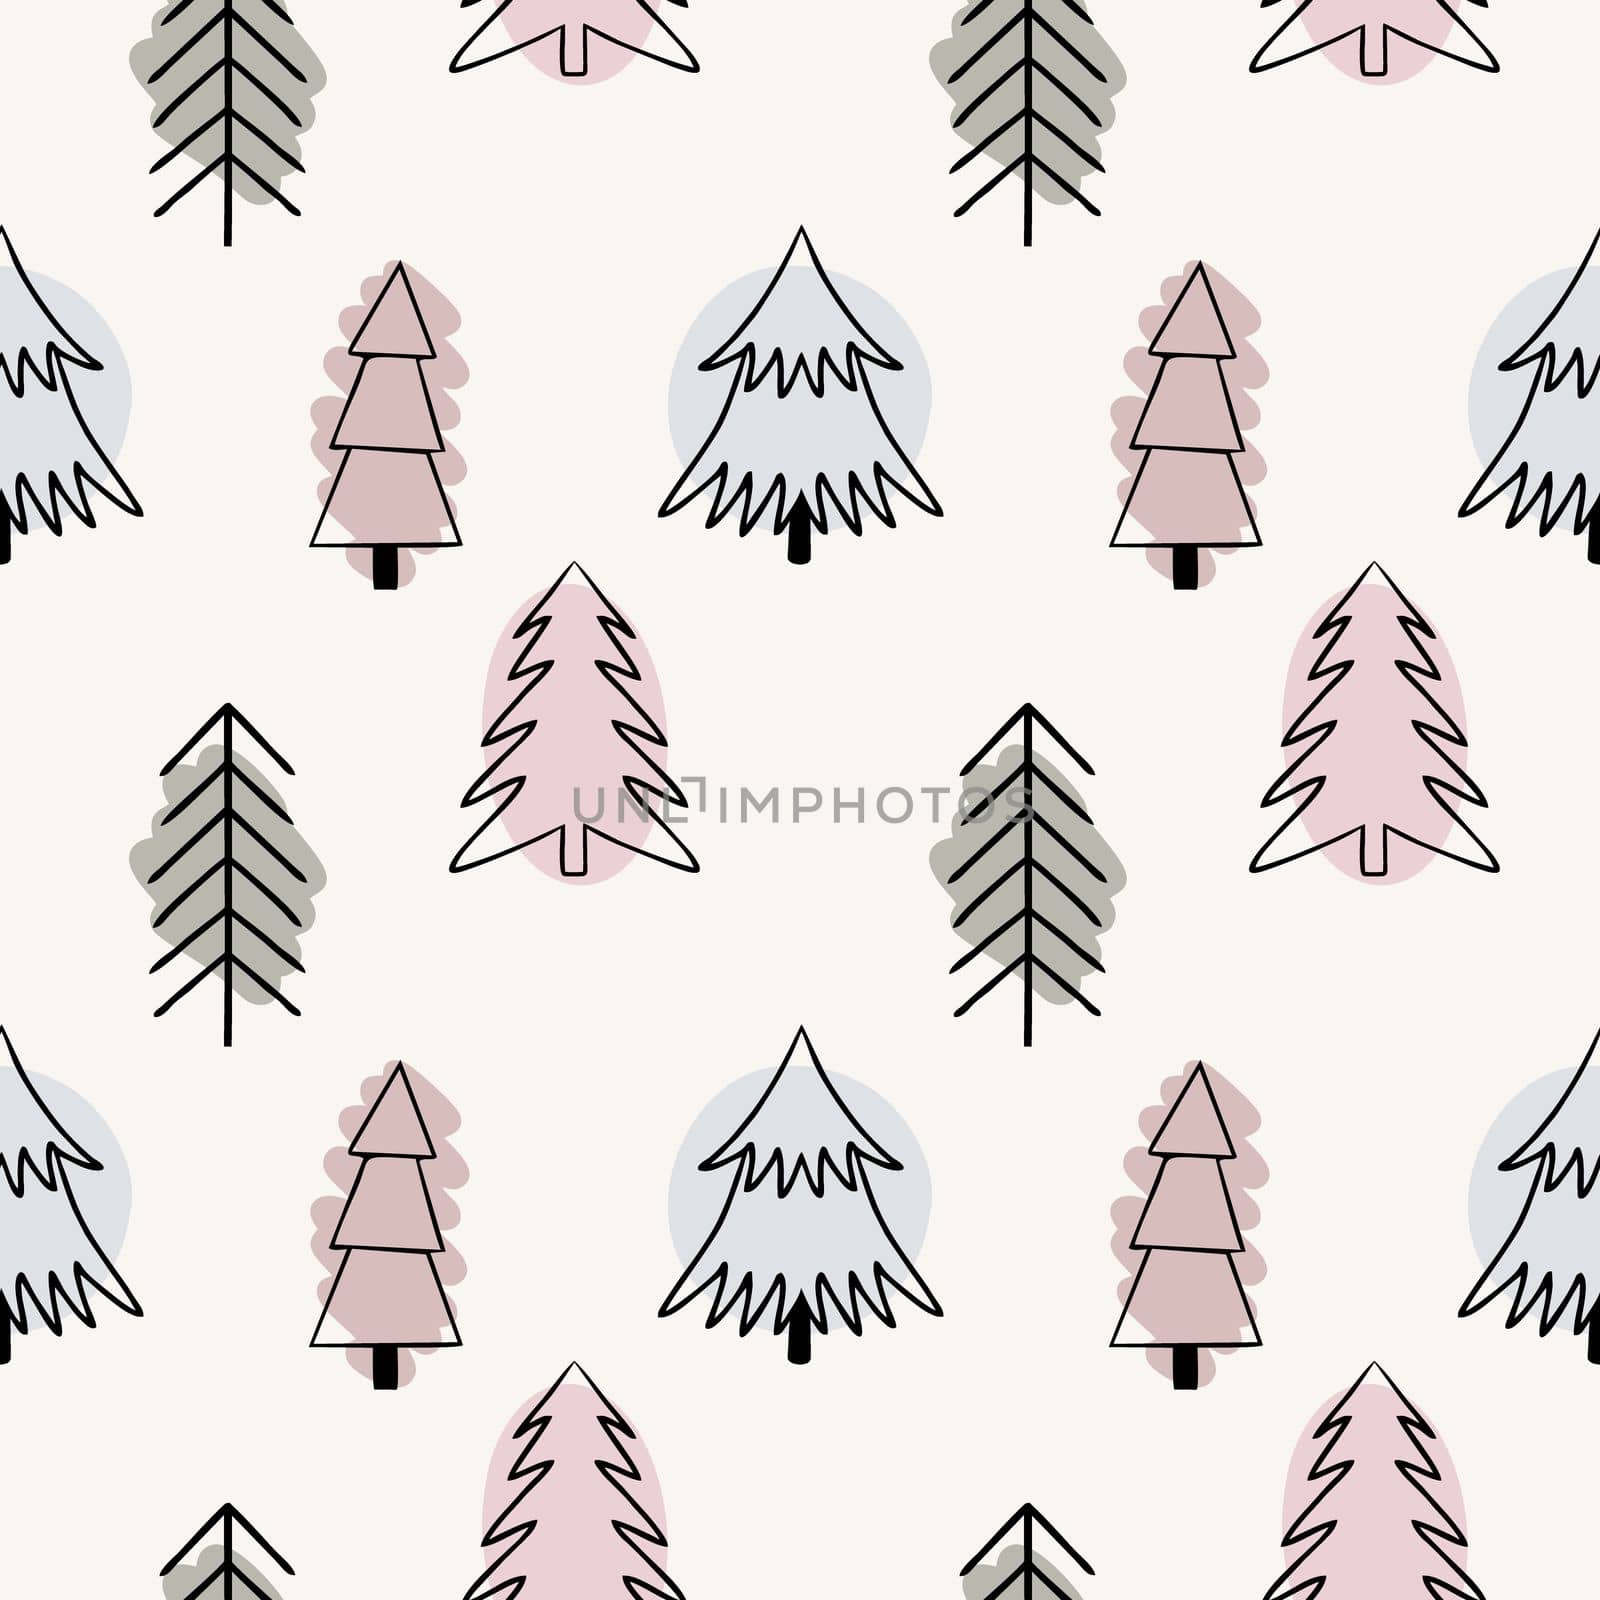 beige pattern with the image of a fir tree. Background for sewing clothes, printing on fabric, packaging paper.